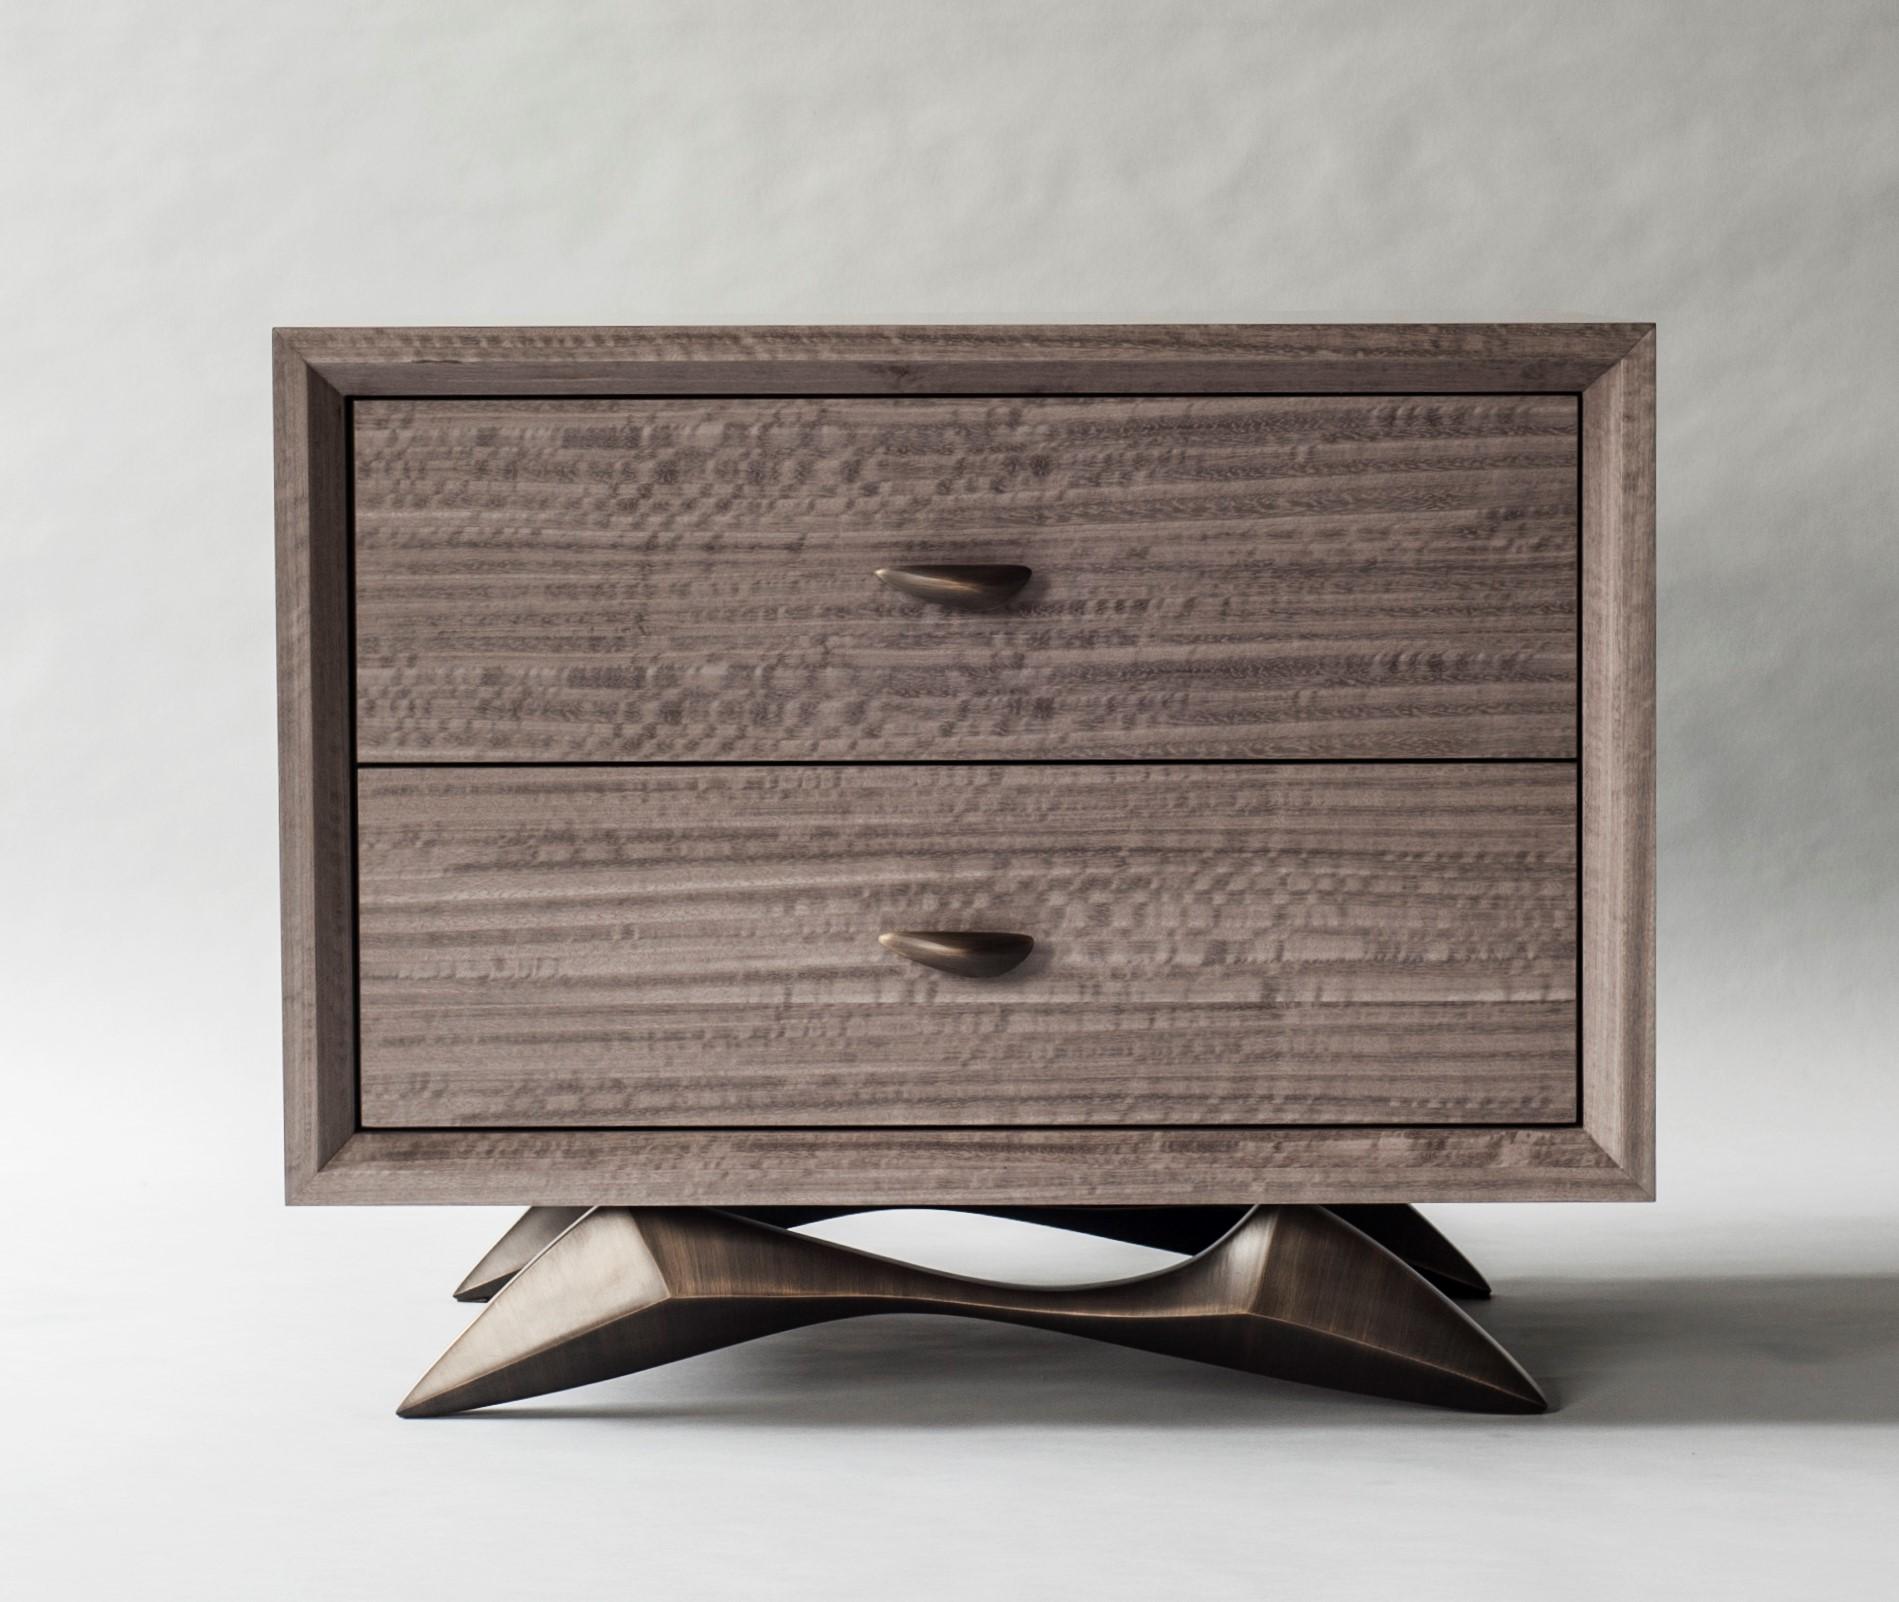 Bevel bedside table by DeMuro Das 
Dimensions: W 75 x D 50.7 x H 61 cm
Materials: Eucalyptus (Slate) - Matte
 Solid Bronze (Antique) handles and legs

Dimensions and finishes can be customized.

DeMuro Das is an international design firm and